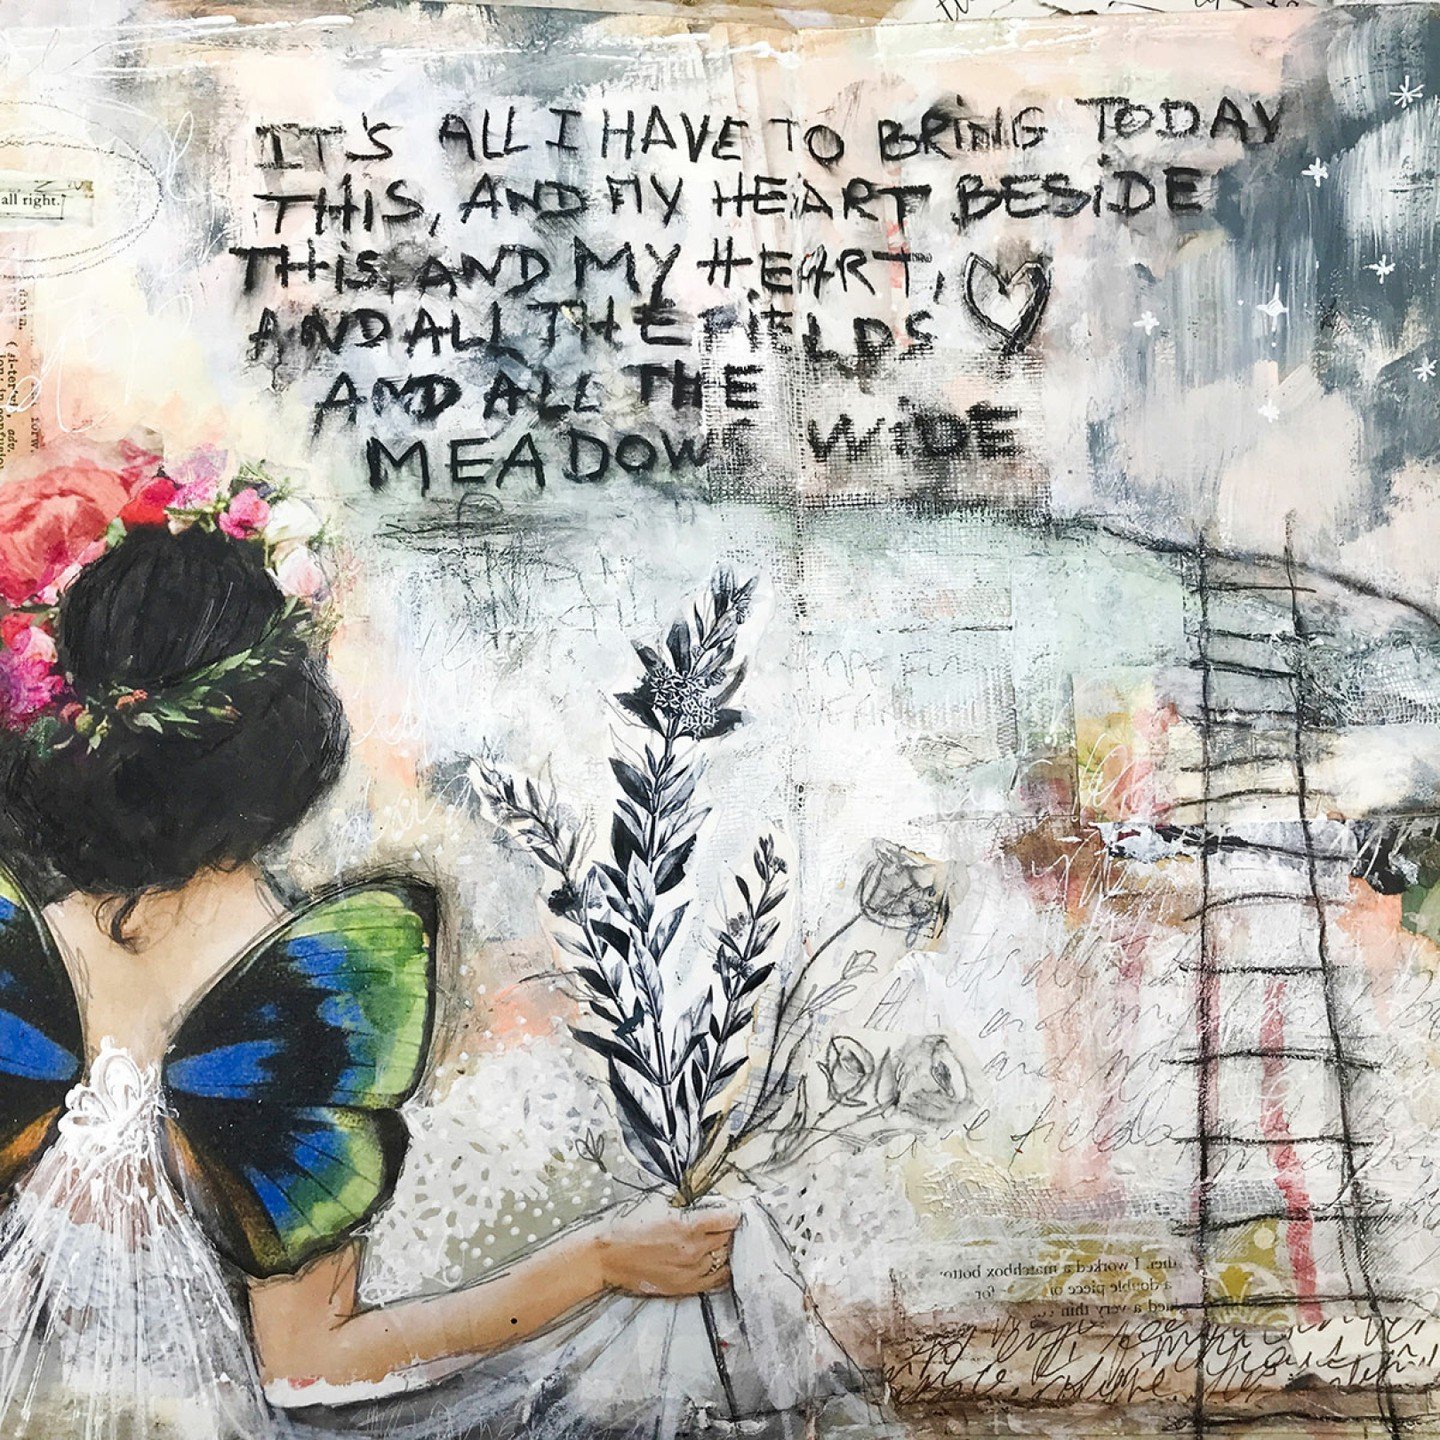 🦋Creative tip of the week: to plan or not to plan? (swipe to see this art journal page come to life!)

One of my lovely students, Mary, just posted this question in our classroom:

💭 Q: &quot;It is good to be spontaneous, joyful and not to overthin